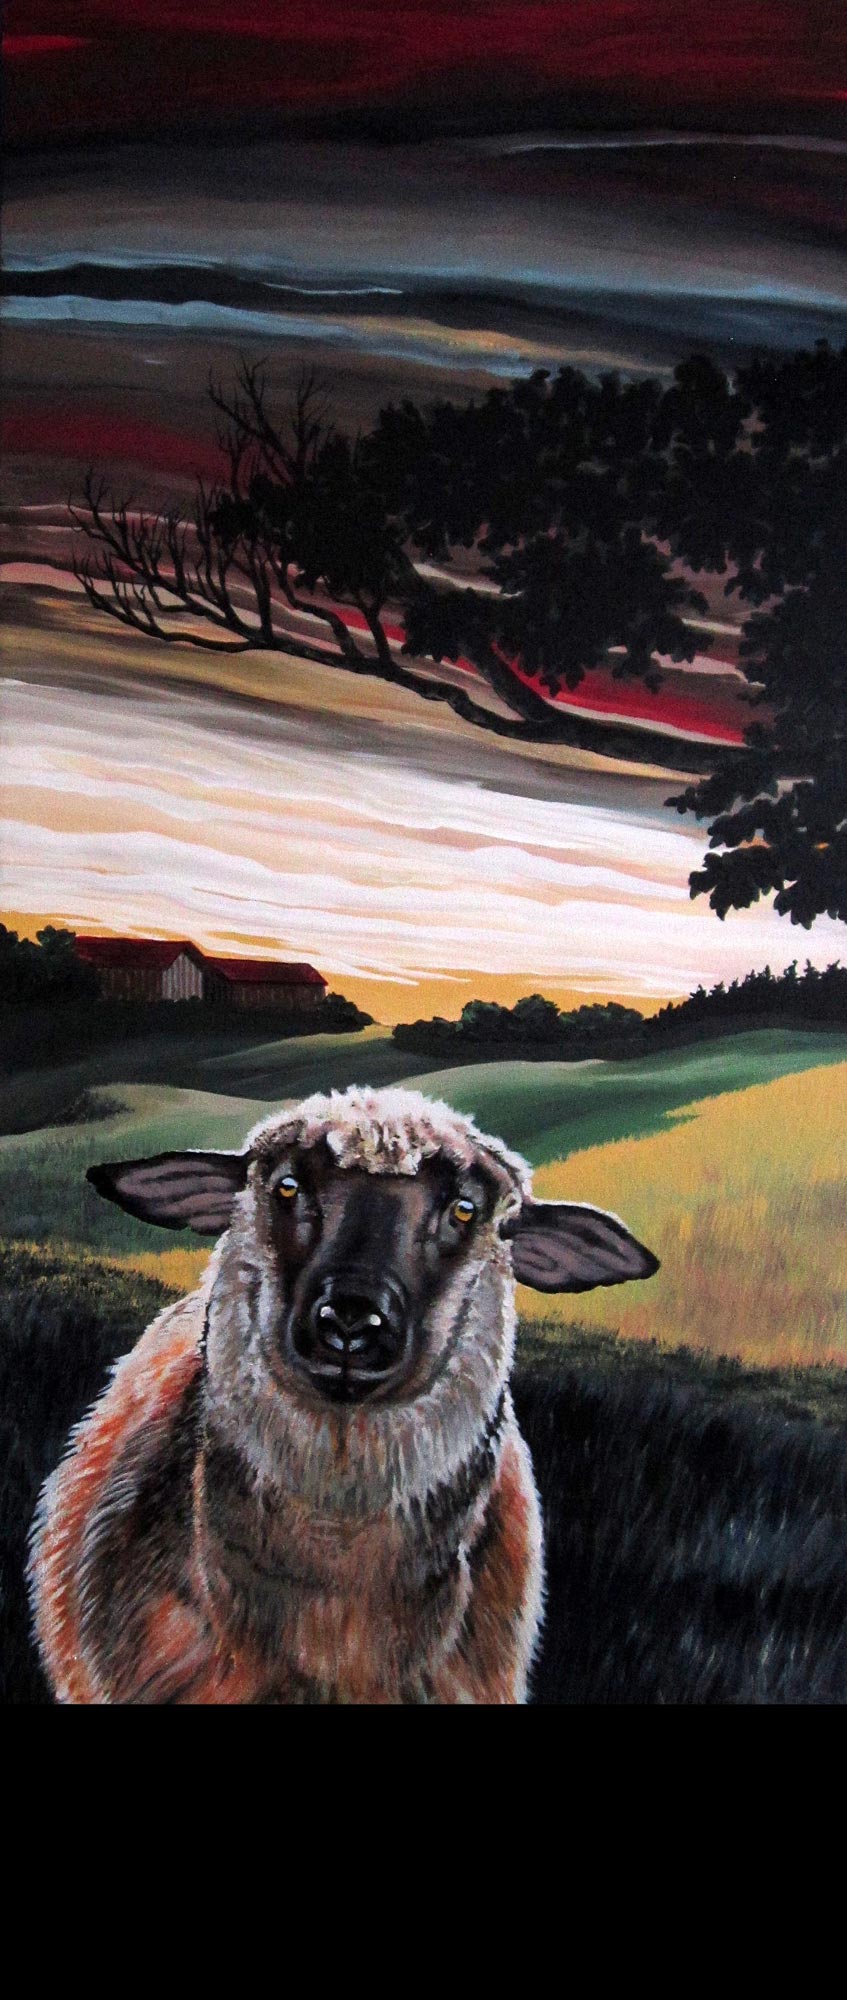 "End of the Day - Sheep", 32x32